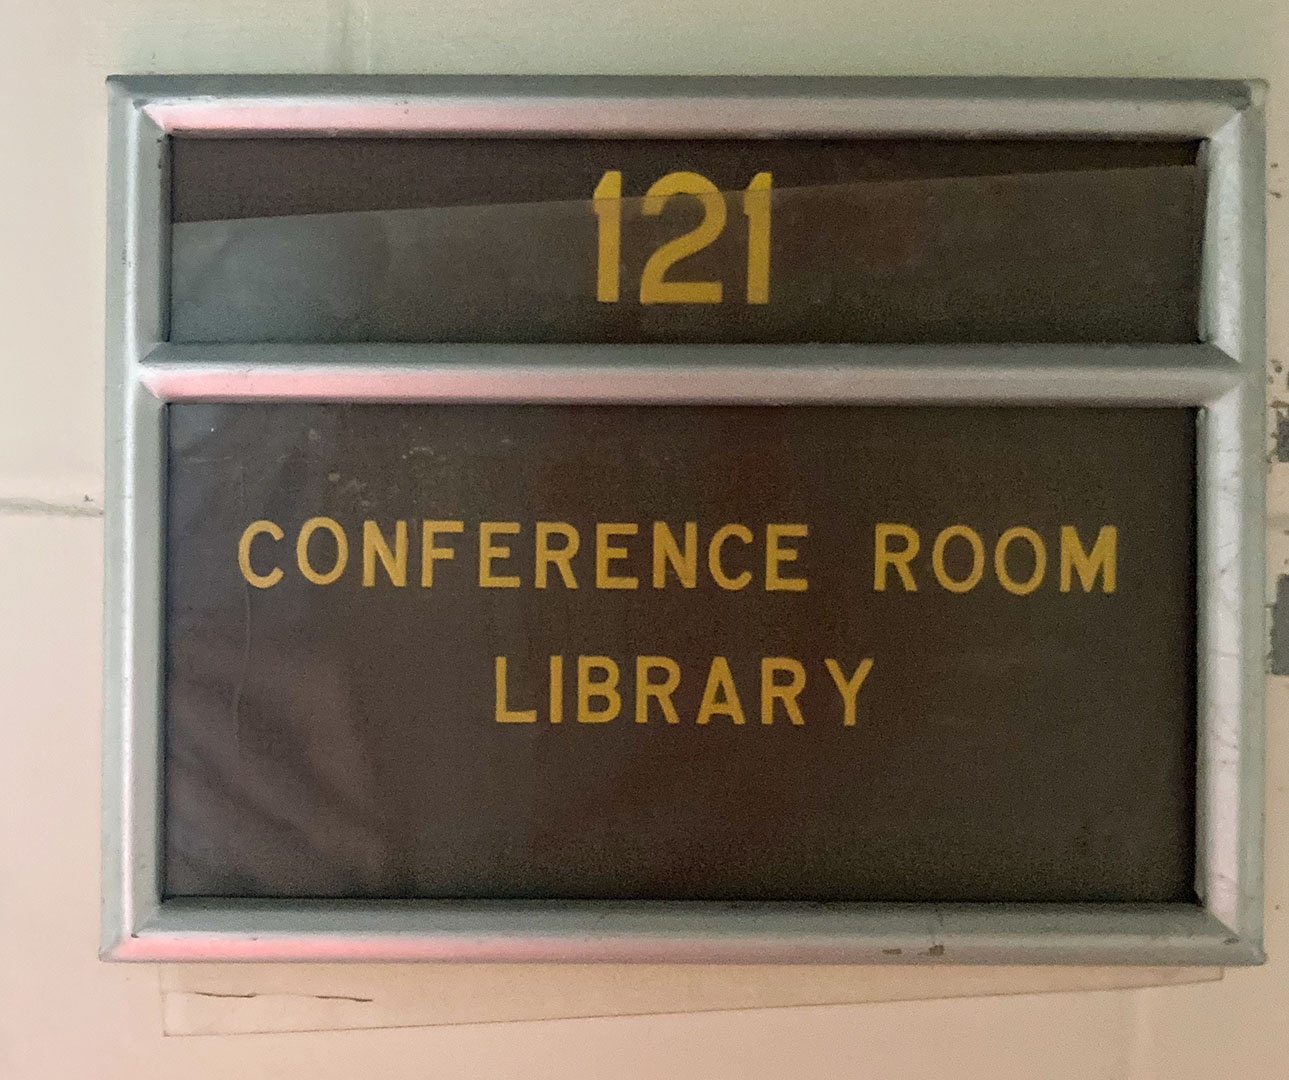 A yellow and brown sign with room number 1C23 on it, in an aluminum rectangular holder